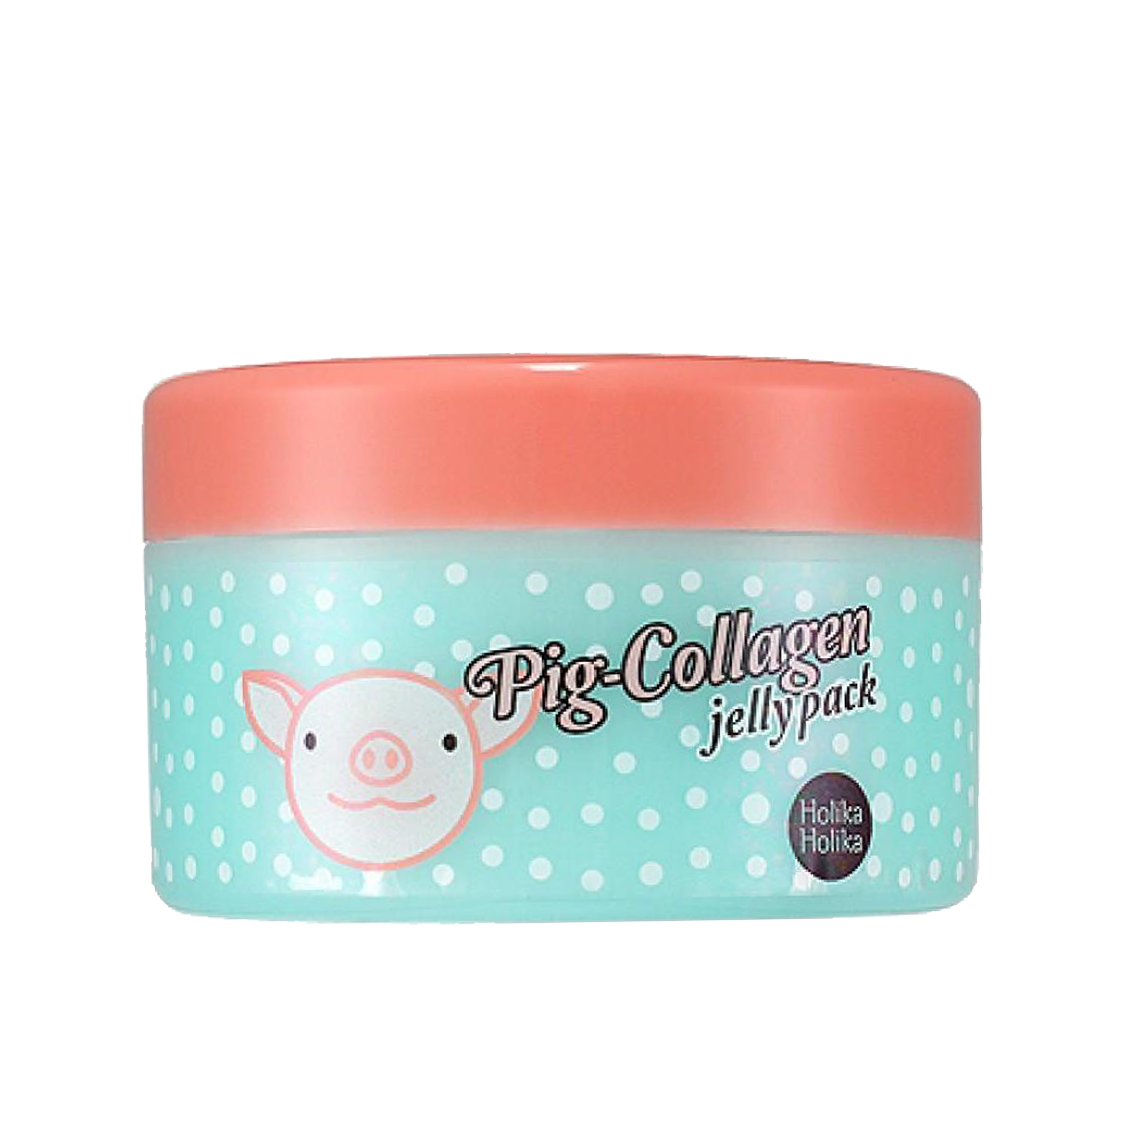 Pig Collagen Jelly Pack 80g